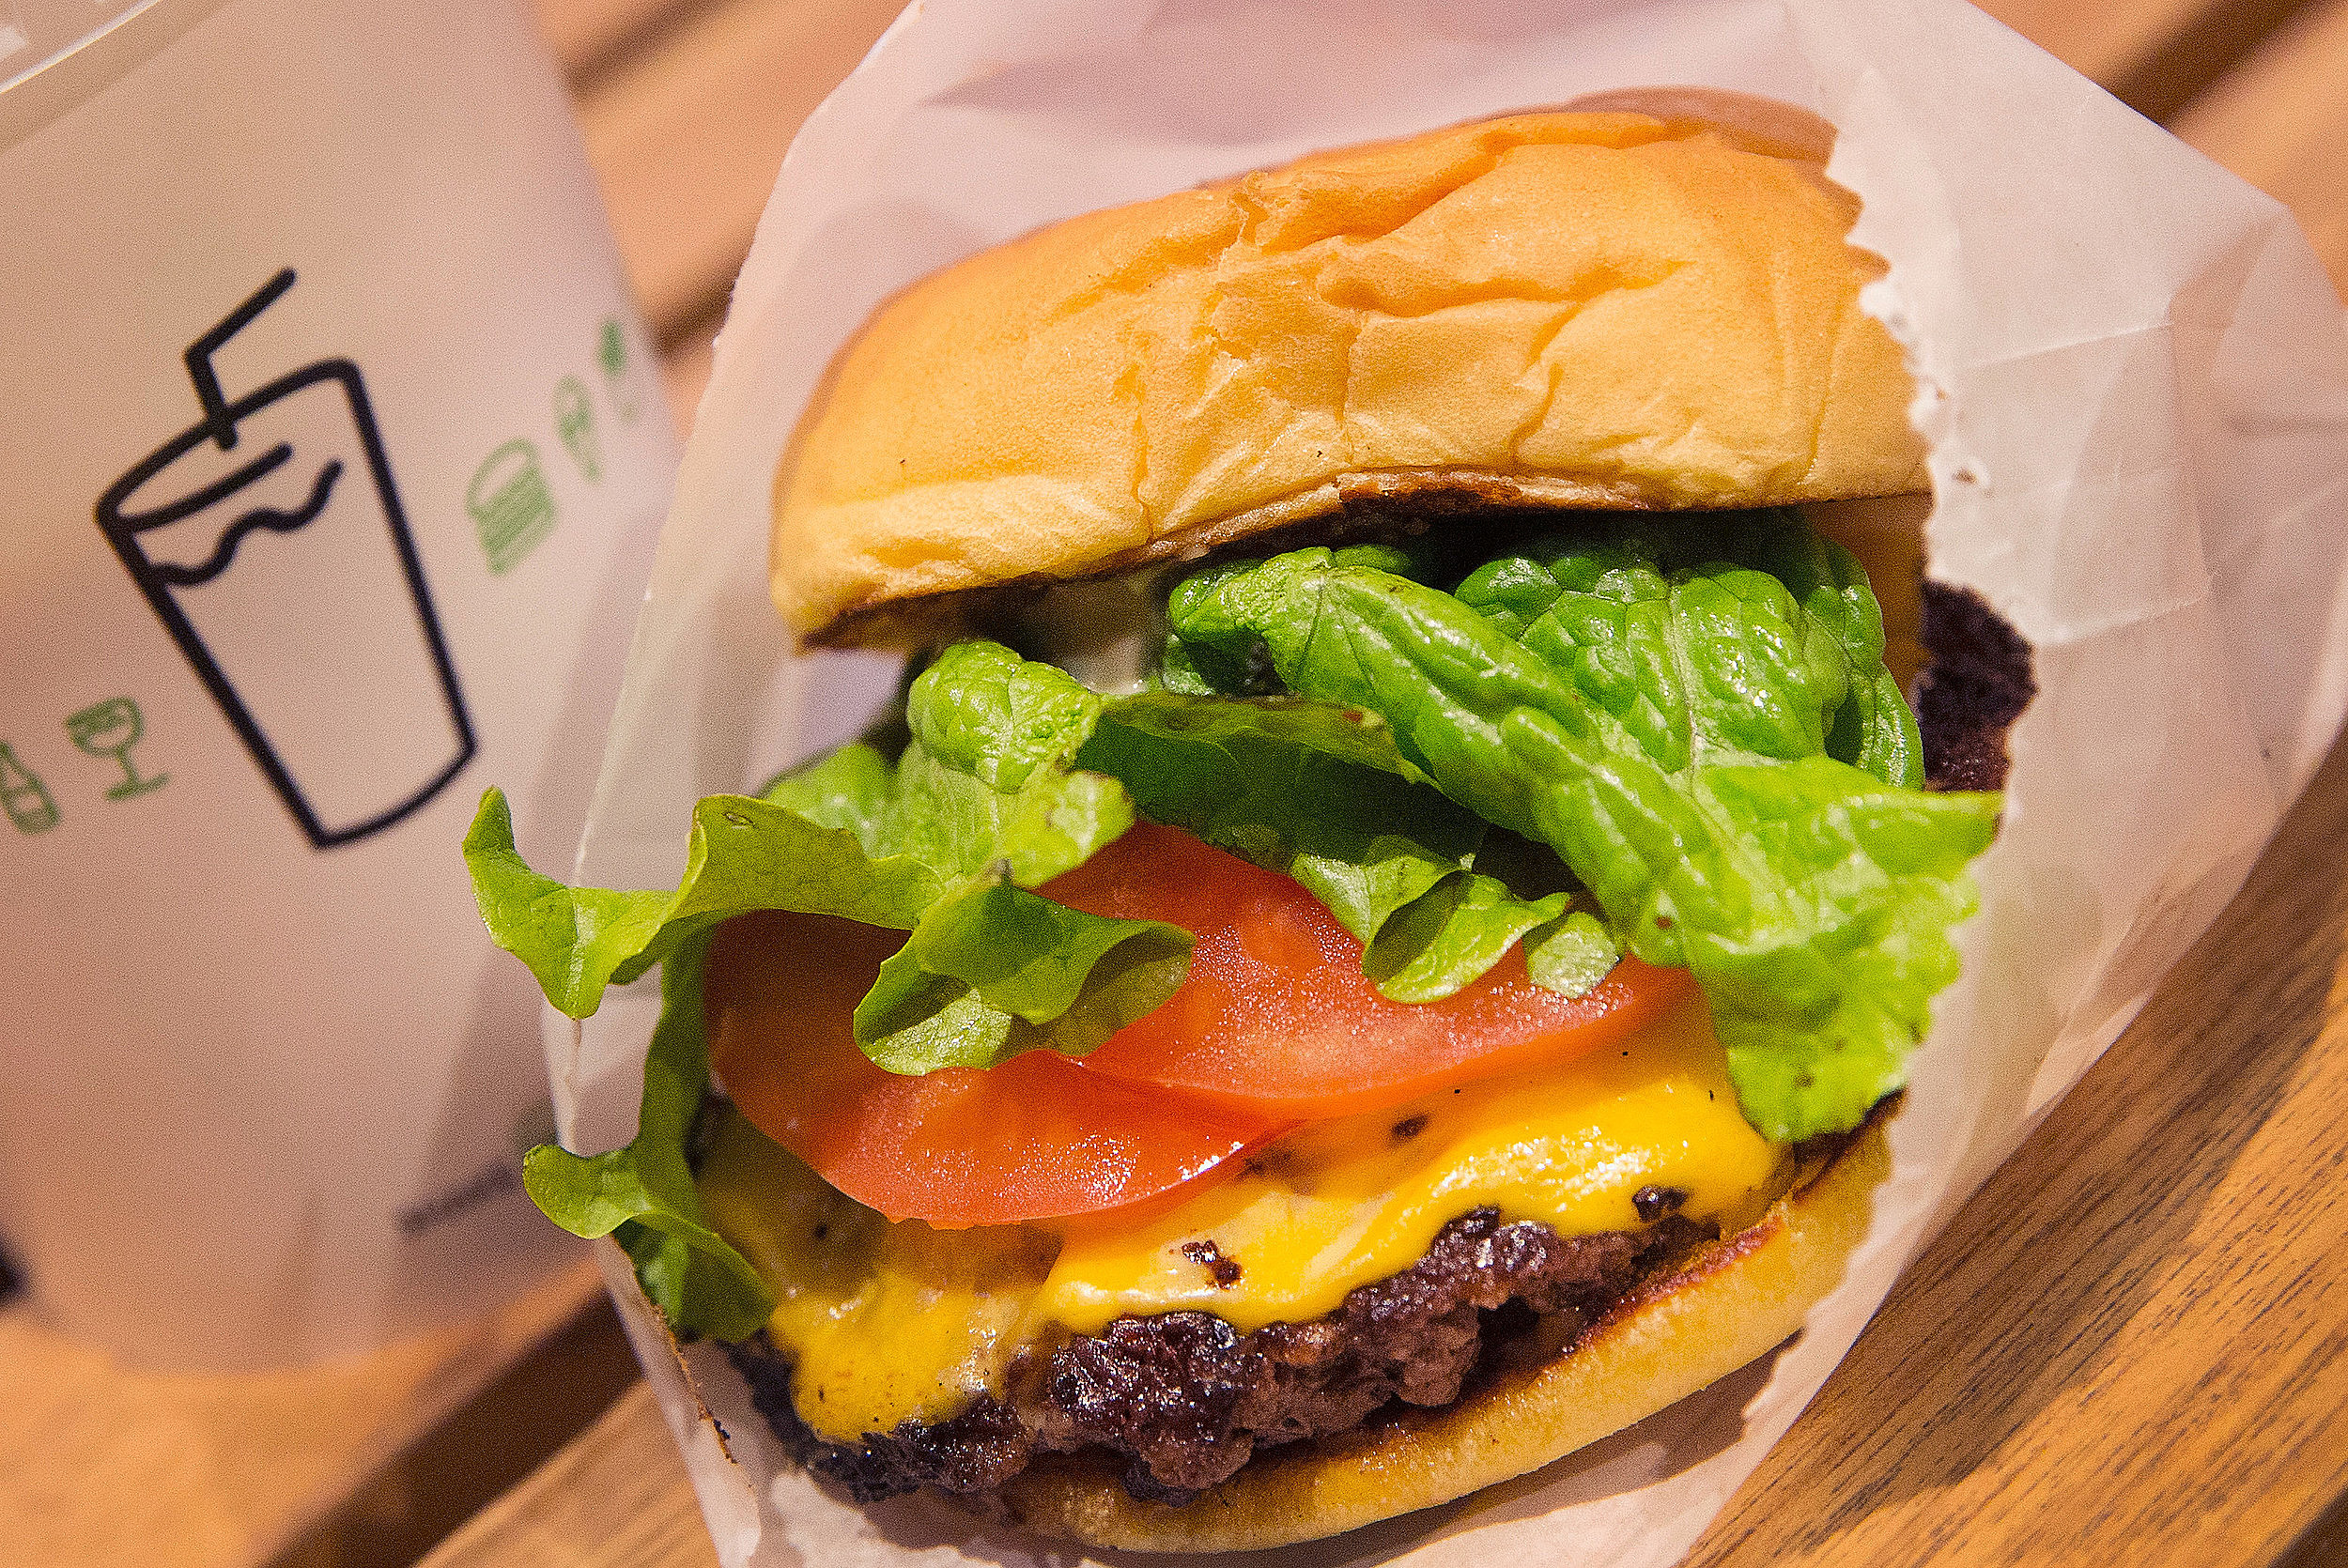 Shake Shack is opening two new New Jersey locations